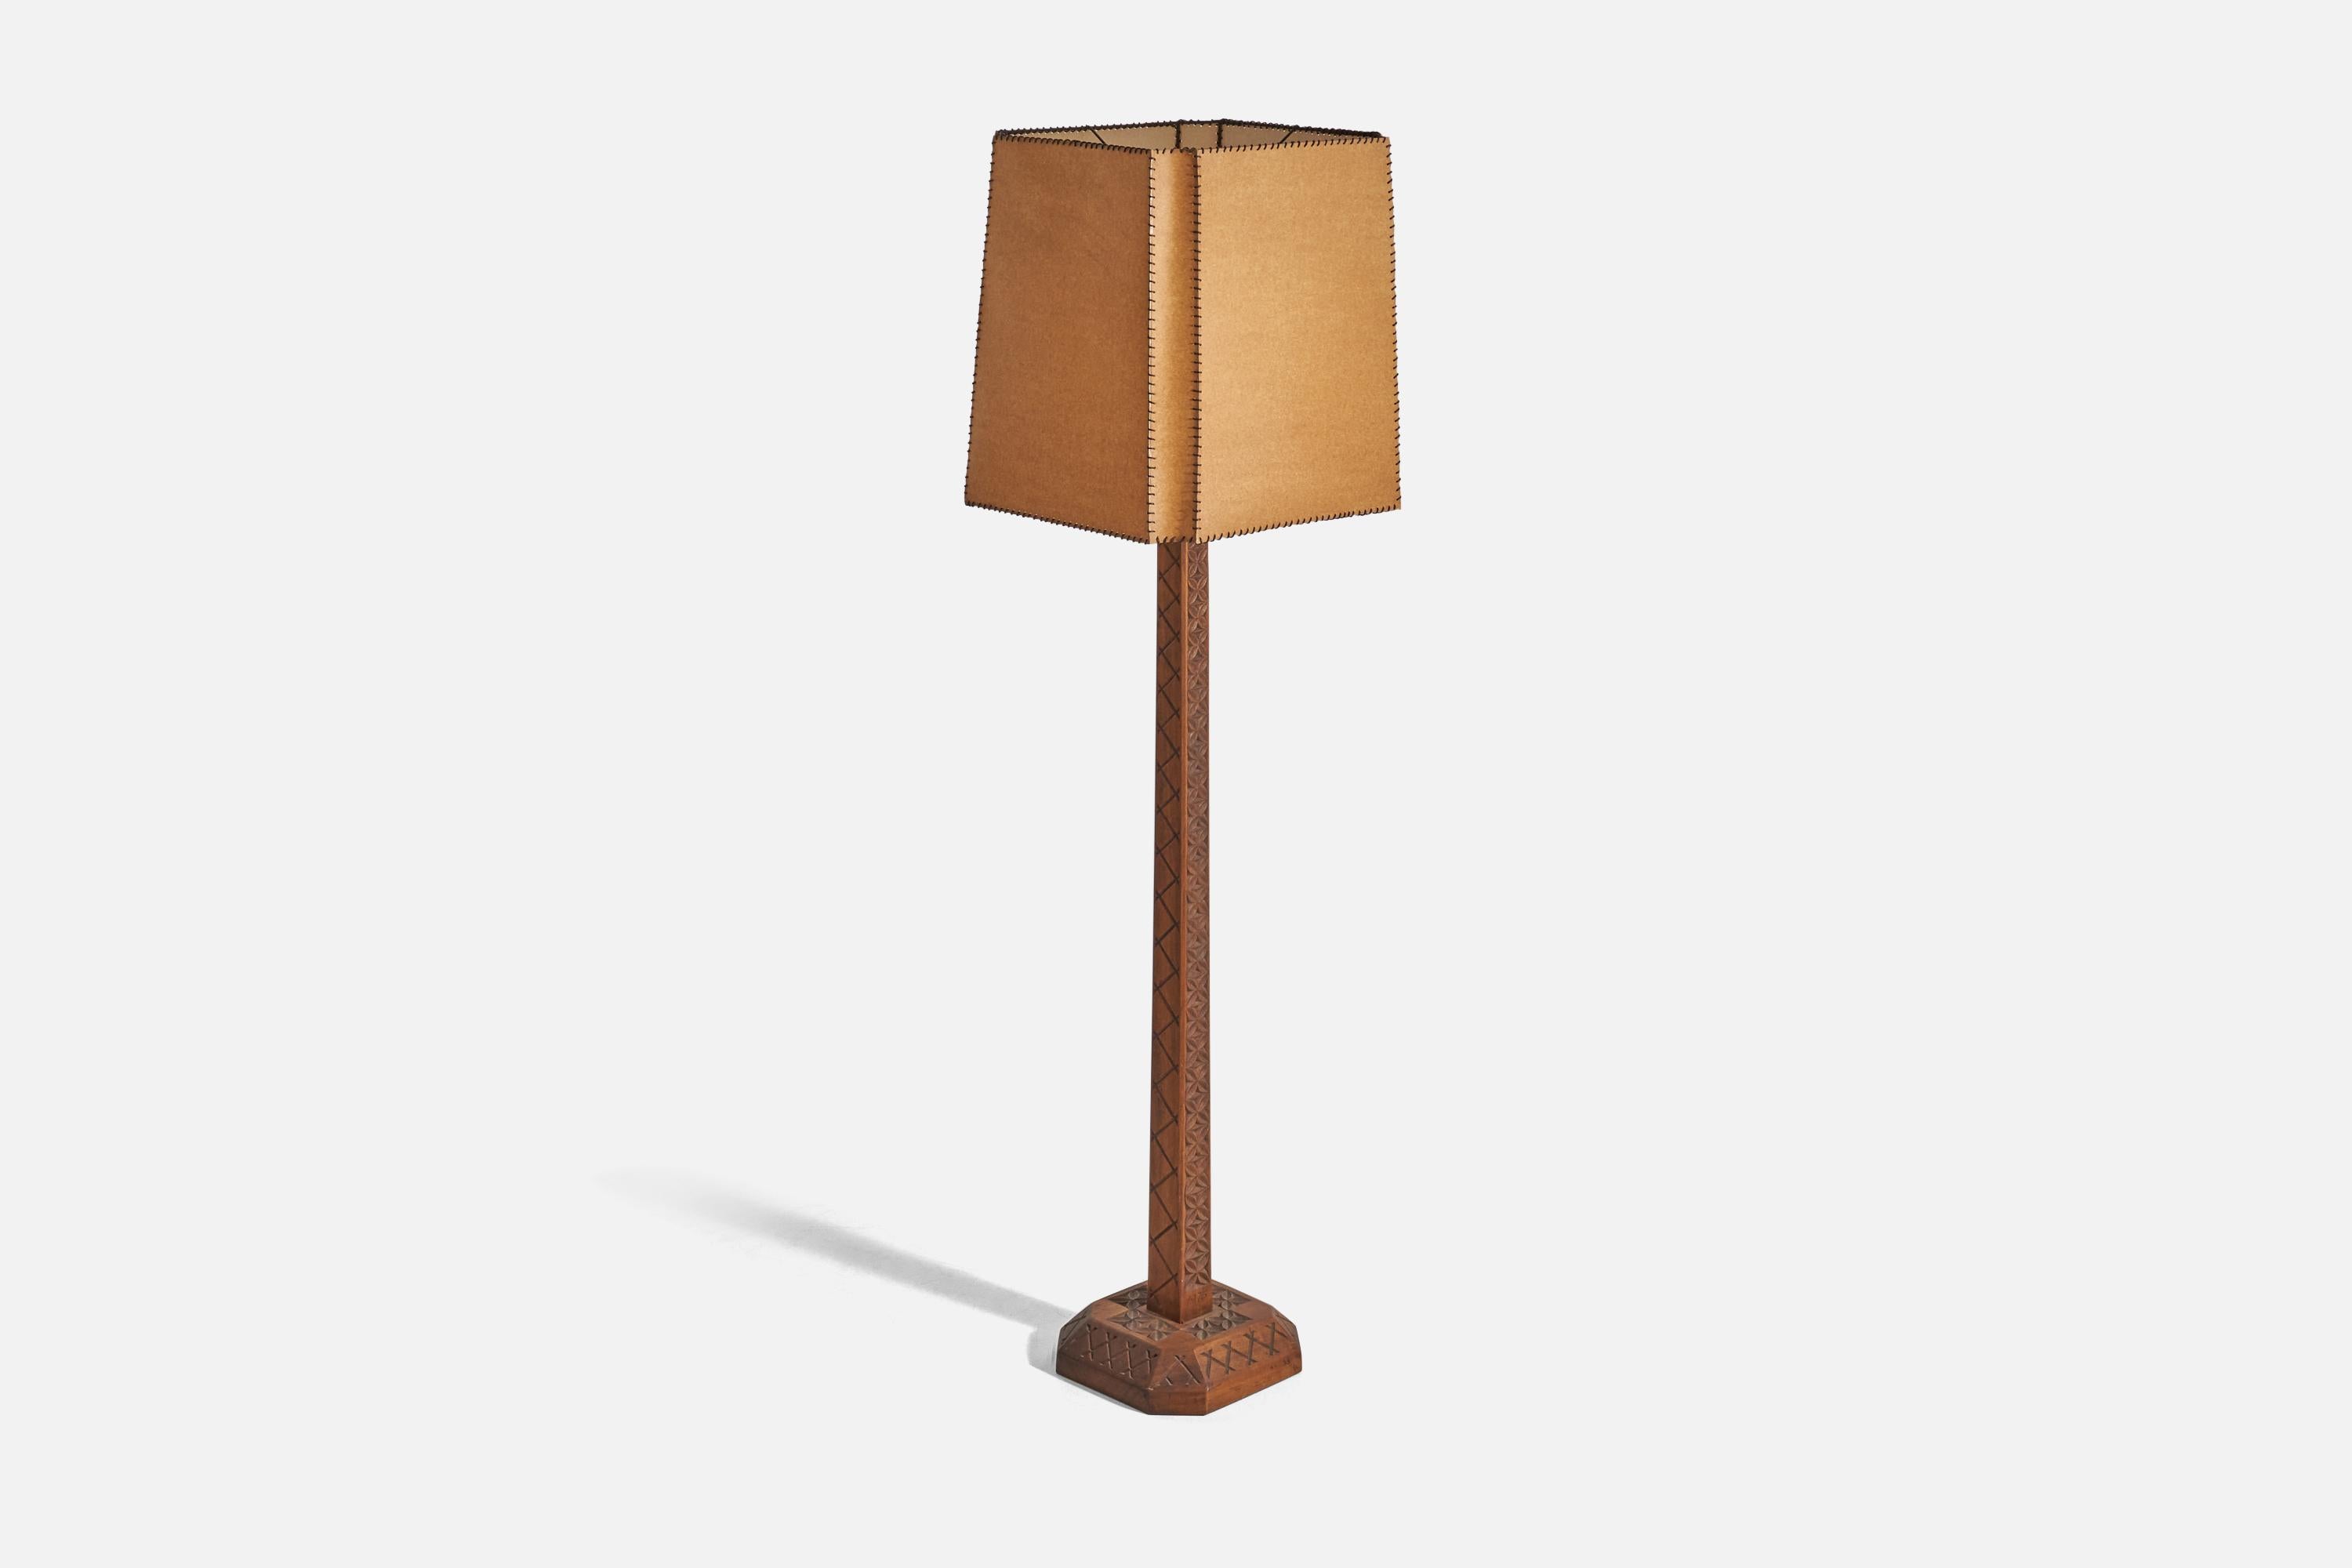 A hand-carved wood and paper floor lamp designed and produced by an American designer, USA, 1976.
  
Sold with Lampshade. Dimensions stated are of Floor Lamp with Lampshade. 

Socket takes standard E-26 medium base bulb.

There is no maximum wattage